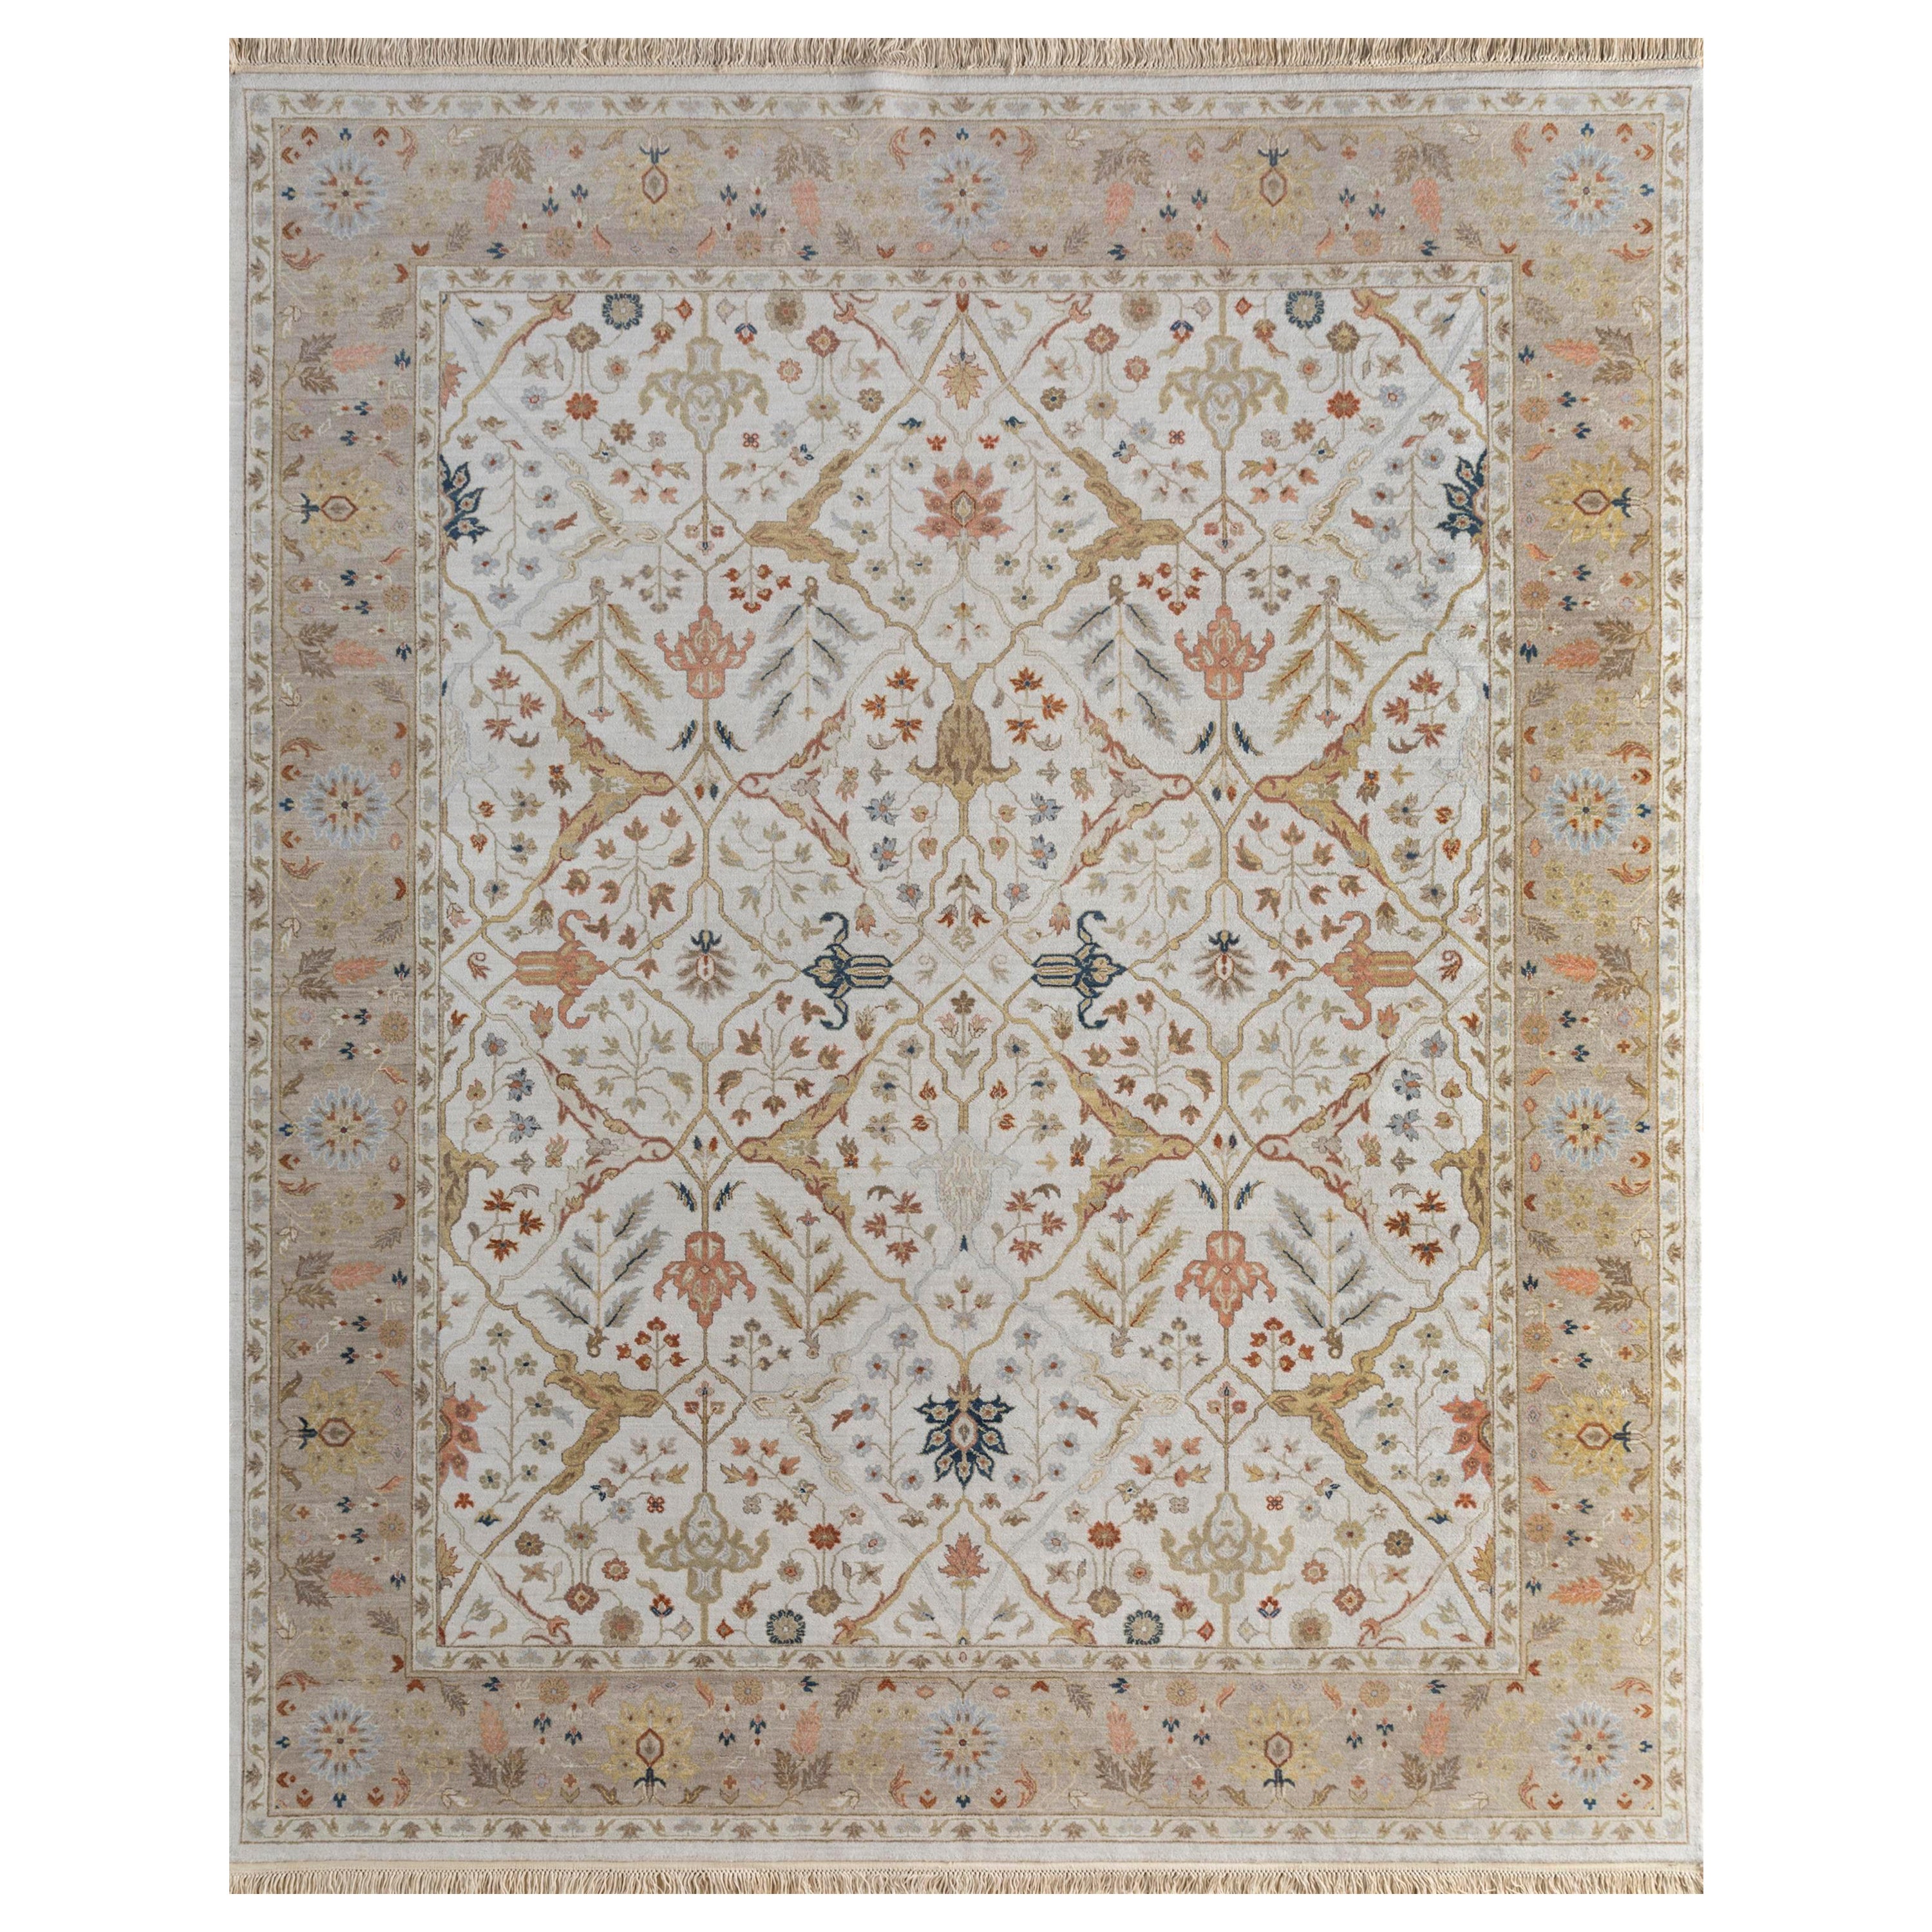 Flora Fantasia White & Silky Beige 300x420 cm Handknotted Rug For Sale